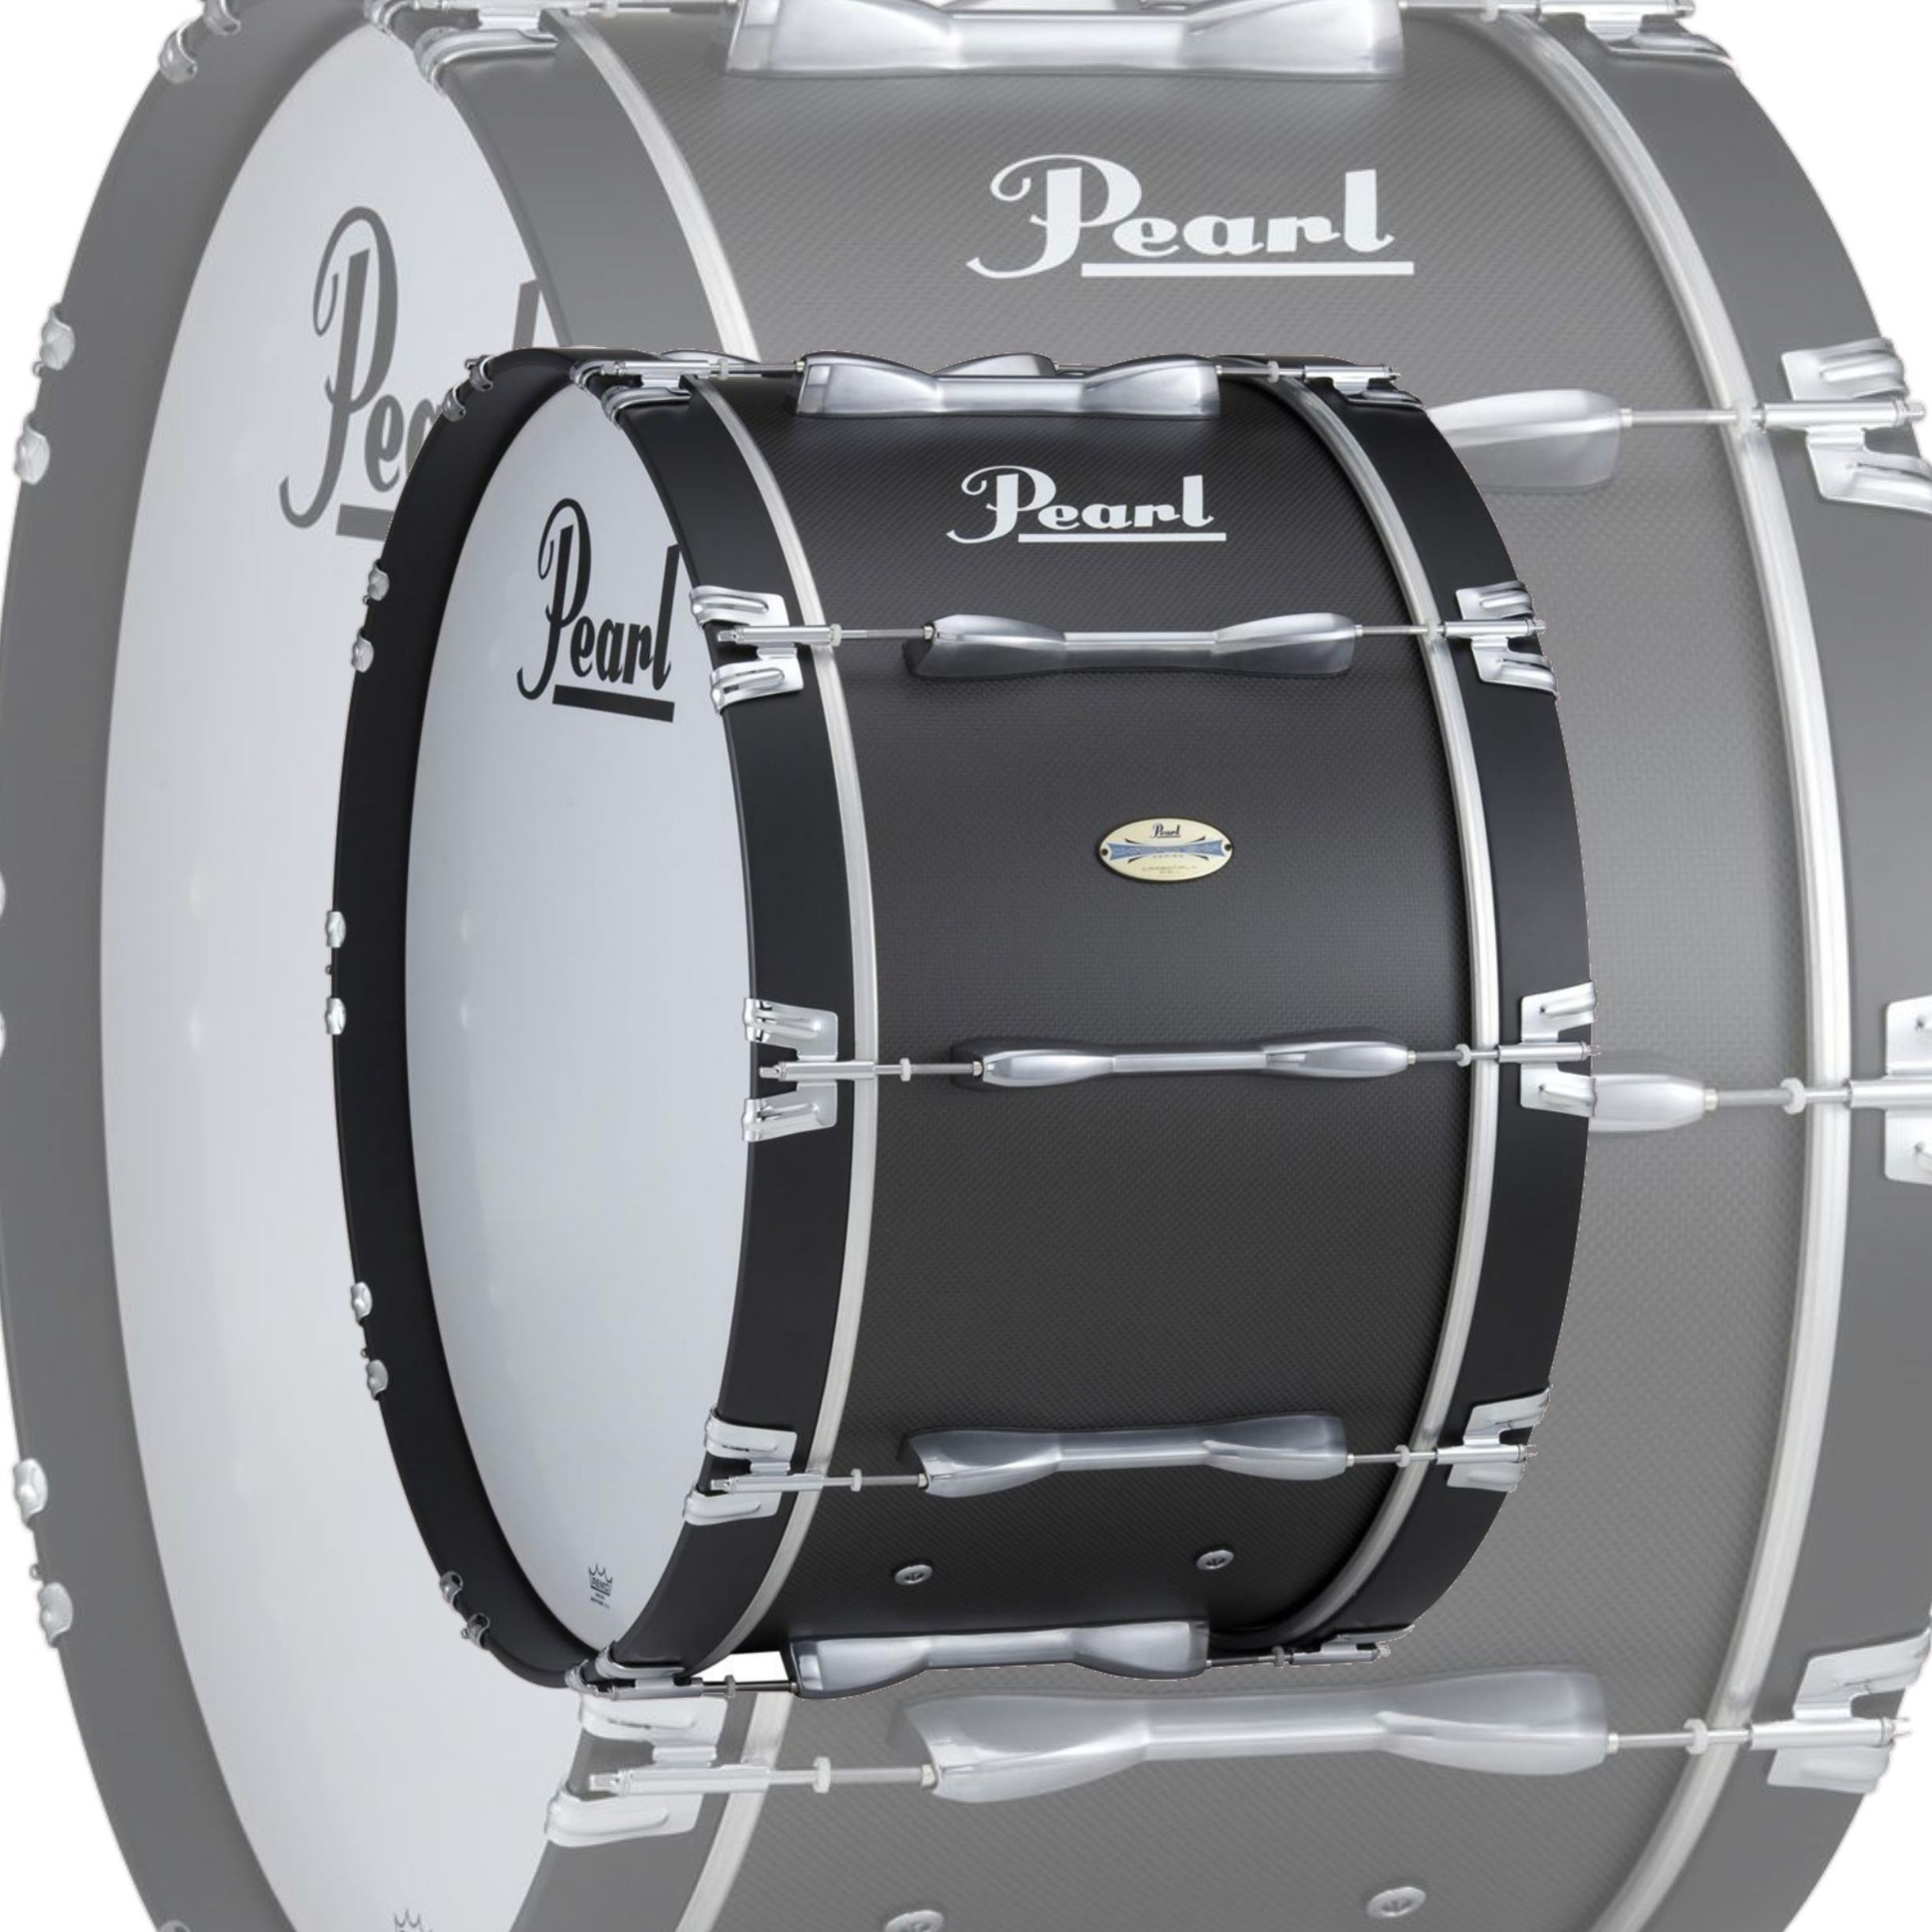 Pearl CarbonPly Championship 18"x14"  Marching Bass Drum